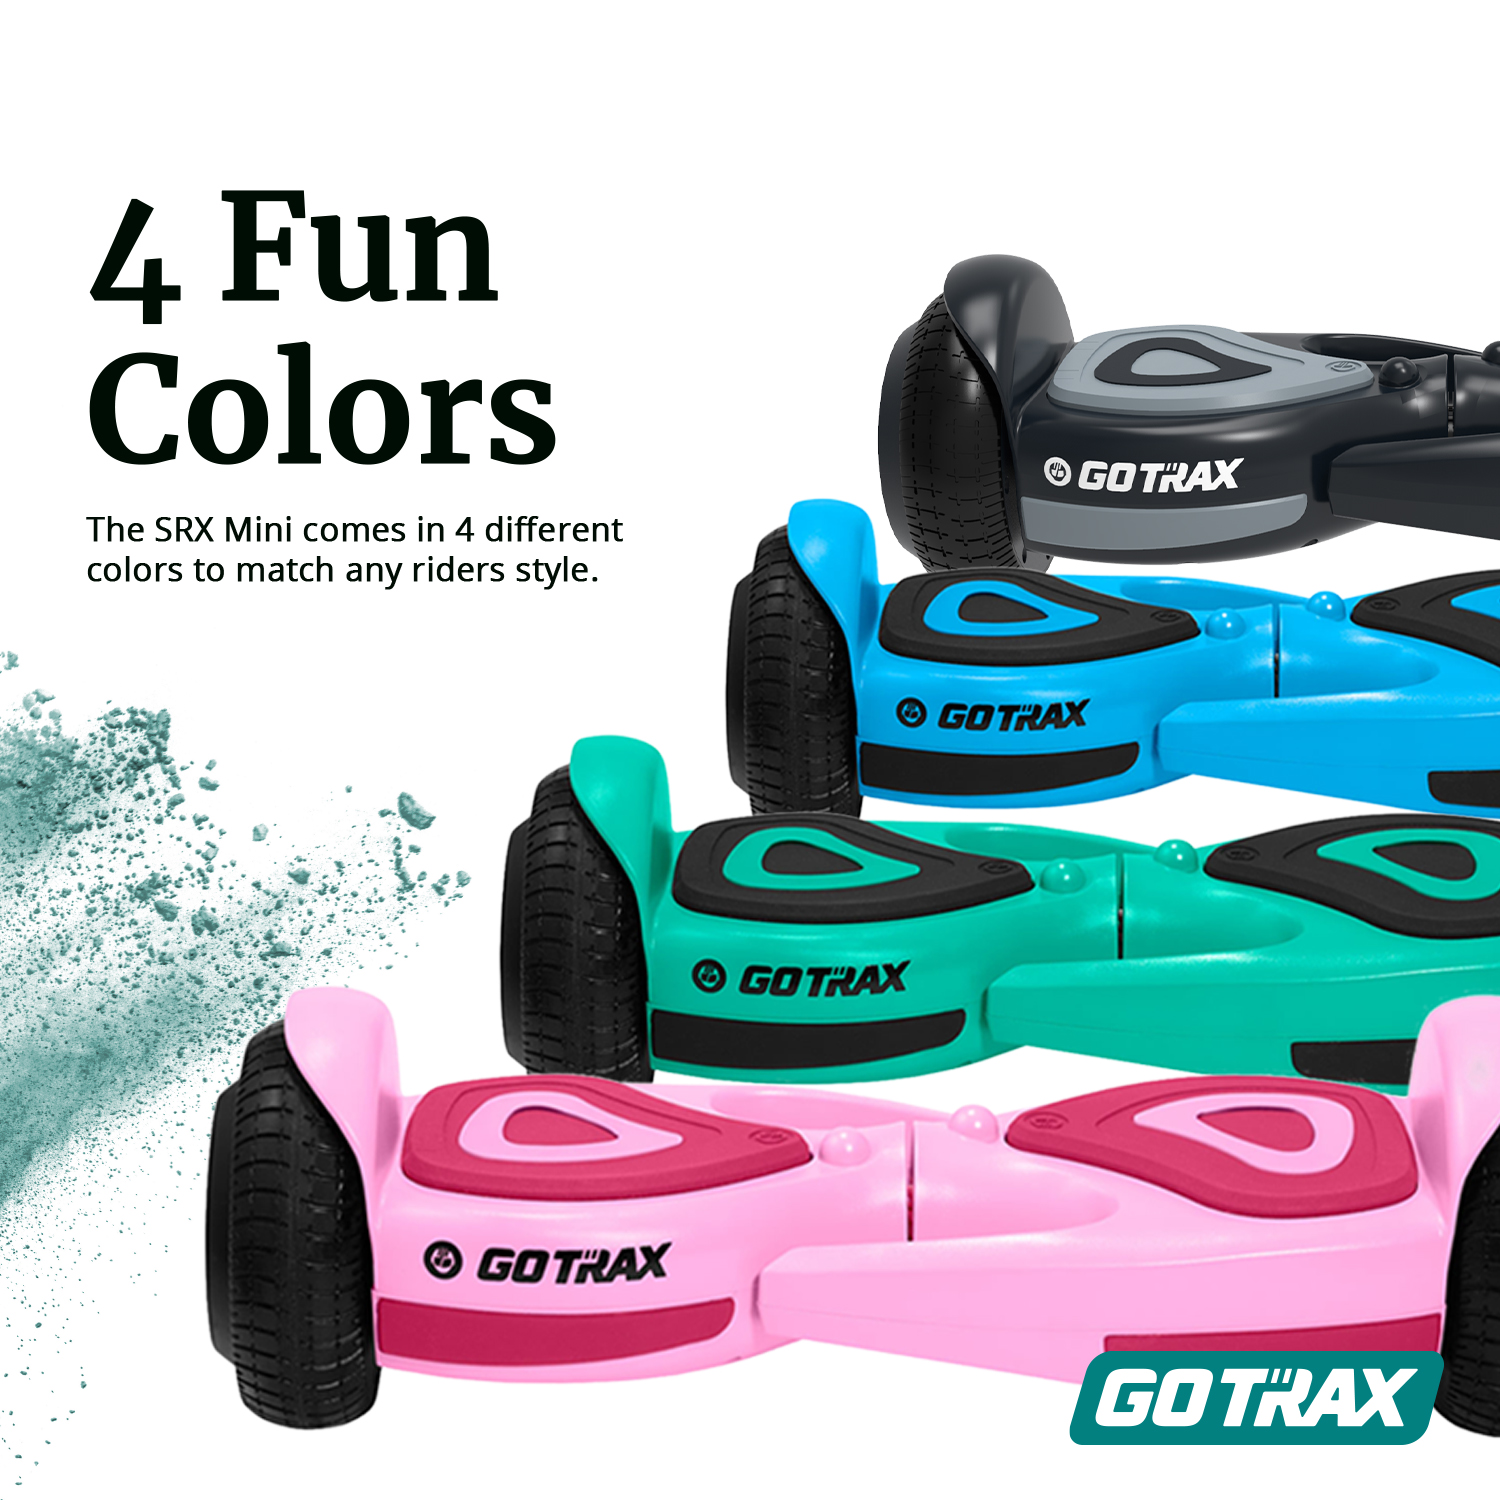 GOTRAX SRX Mini Hoverboard for Kids 6-12, 6.5" Wheels 150W Motor up to 5 mph Hover Boards Black - image 3 of 12